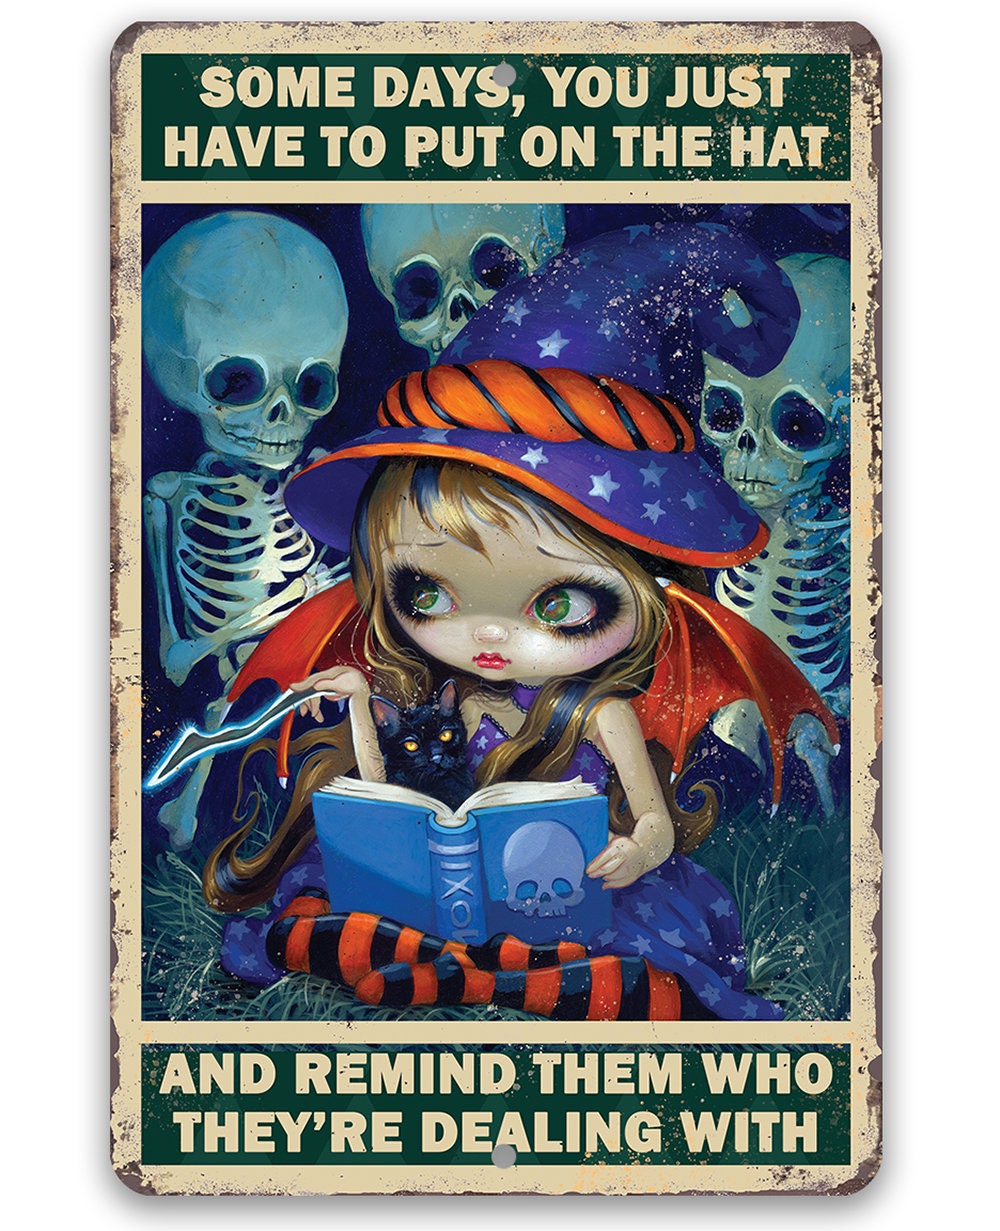 Some Days, You Just Have to Put on the Hat - 8" x 12" or 12" x 18" Aluminum Tin Awesome Gothic Metal Poster Lone Star Art 